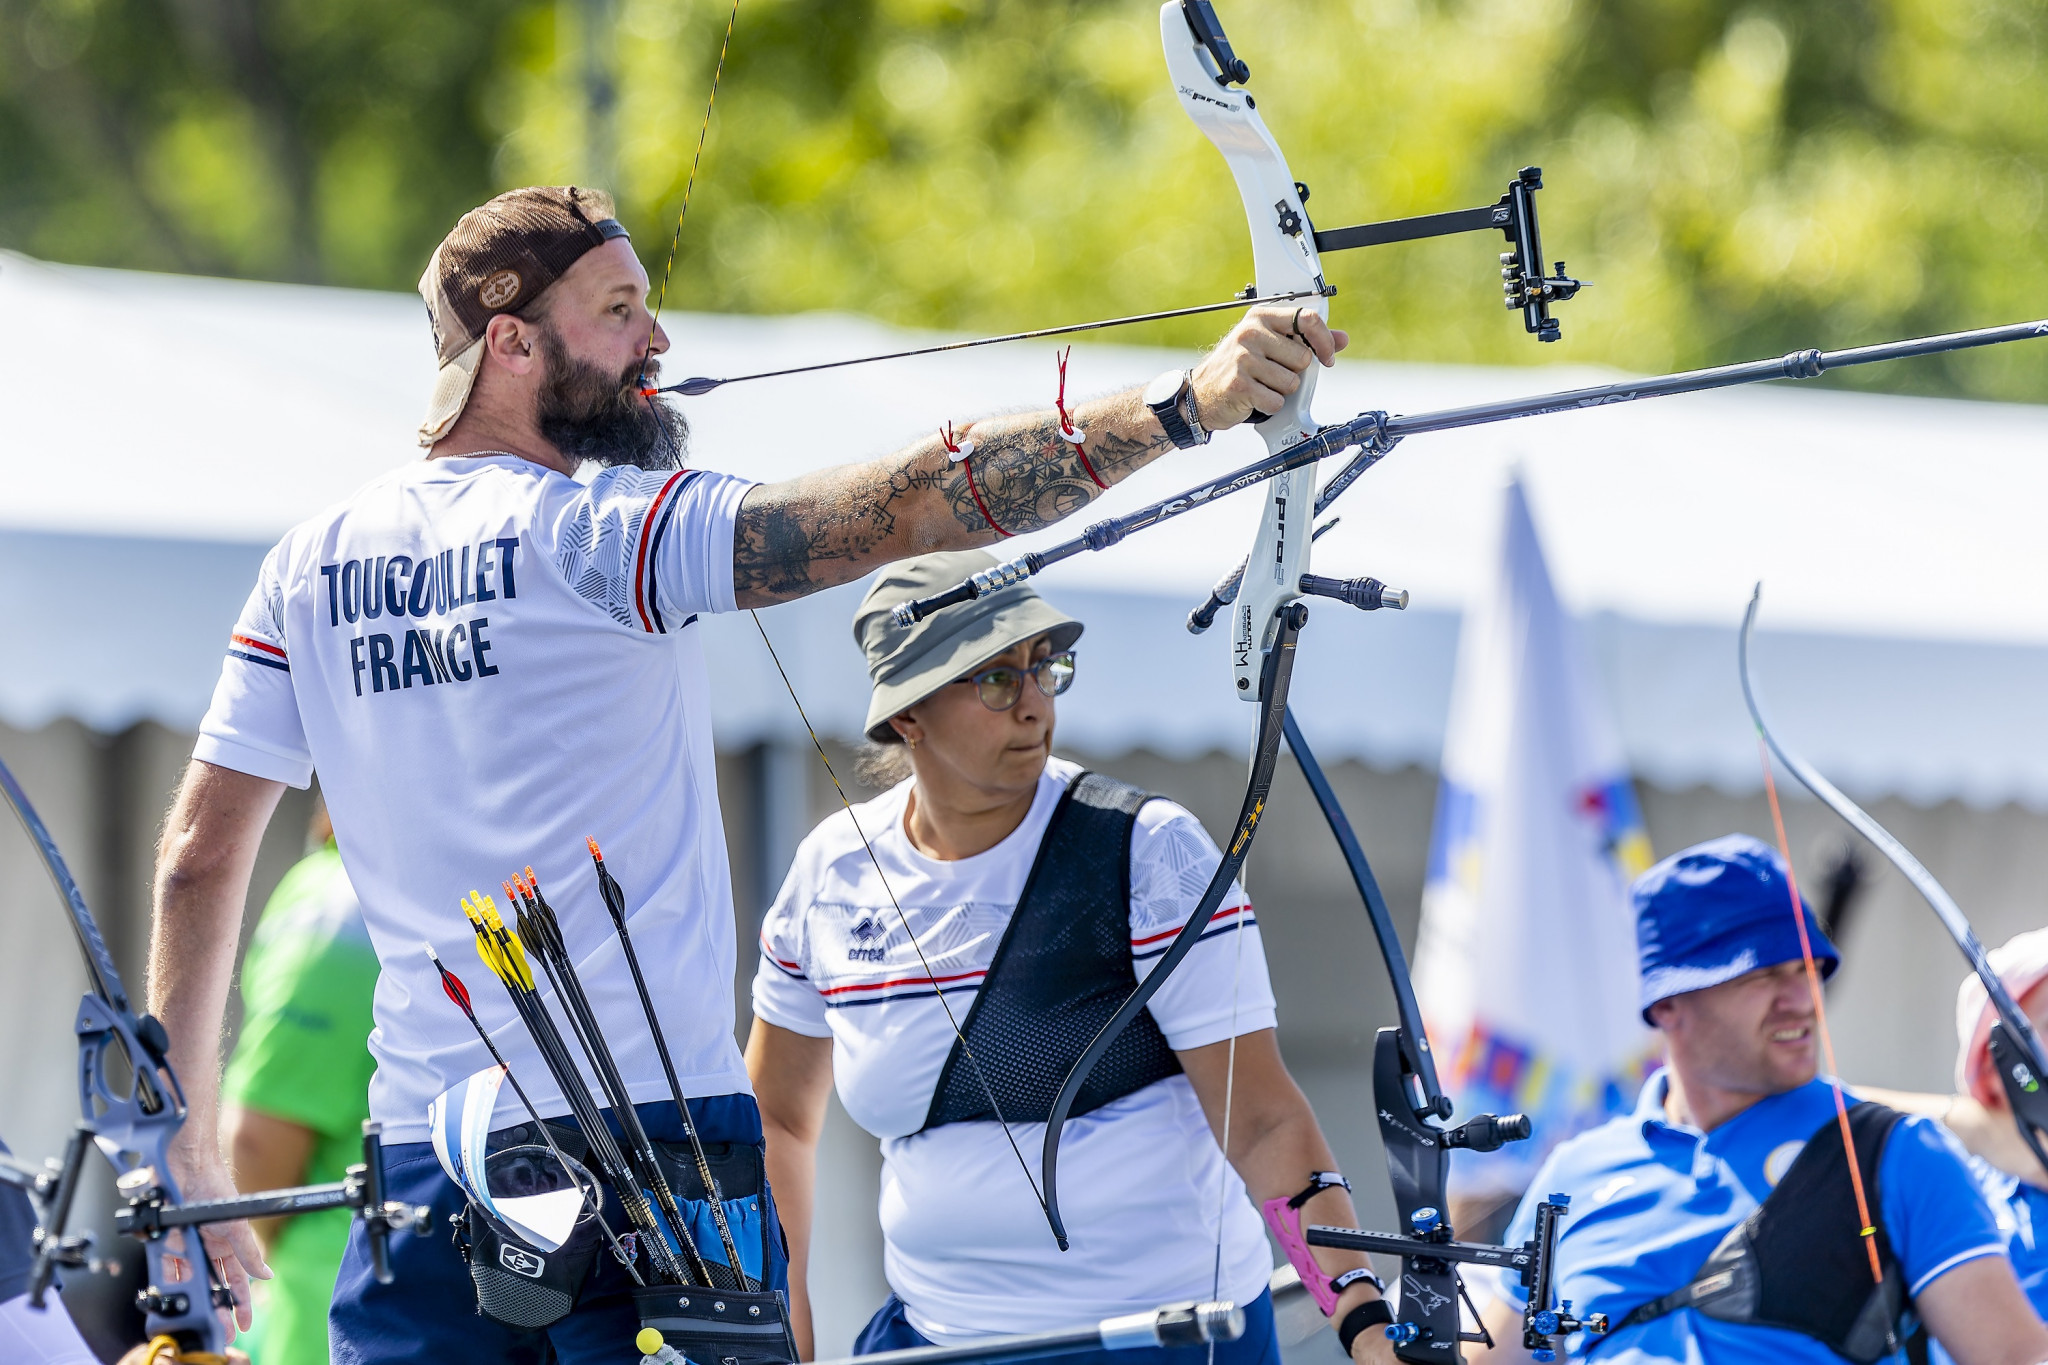 France's Guillaume Toucoullet won all three of his matches to advance in the competition ©EPC